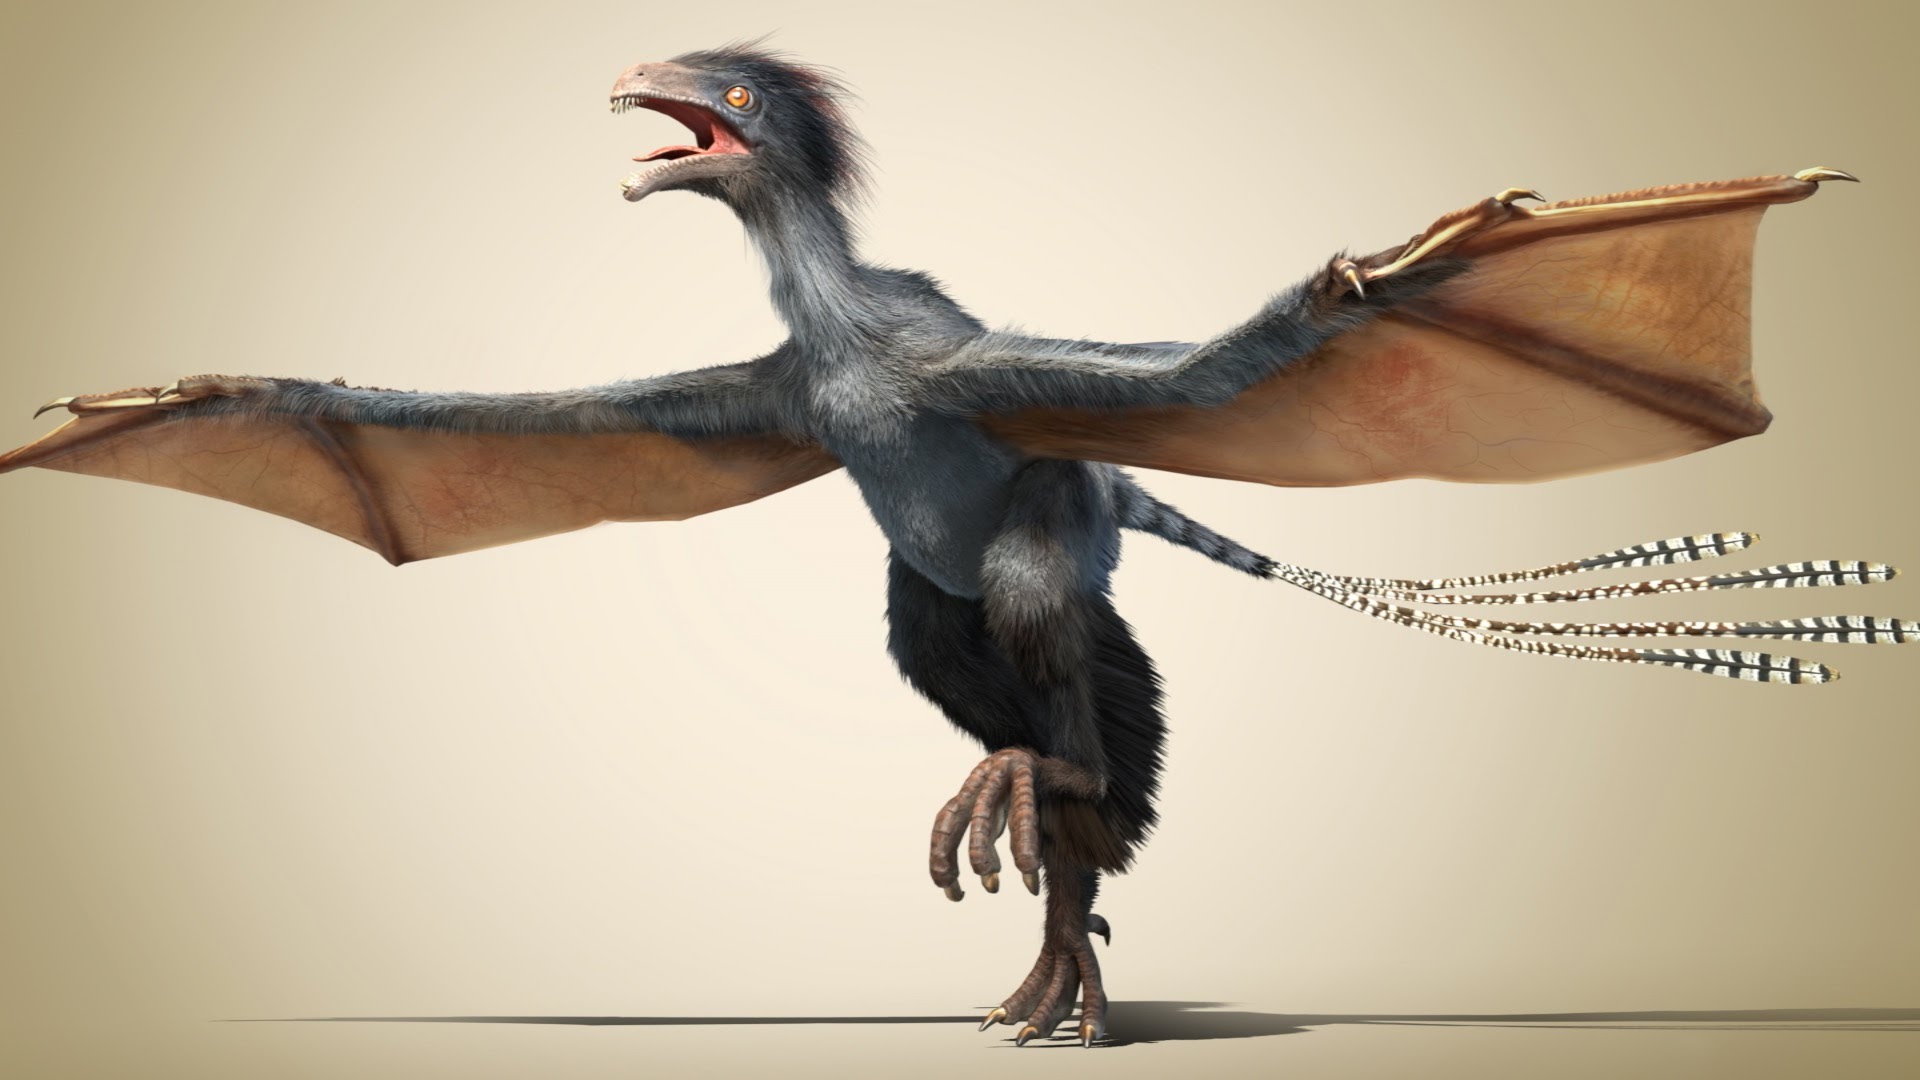 A new dinosaur: Flying without feathers - YouTube